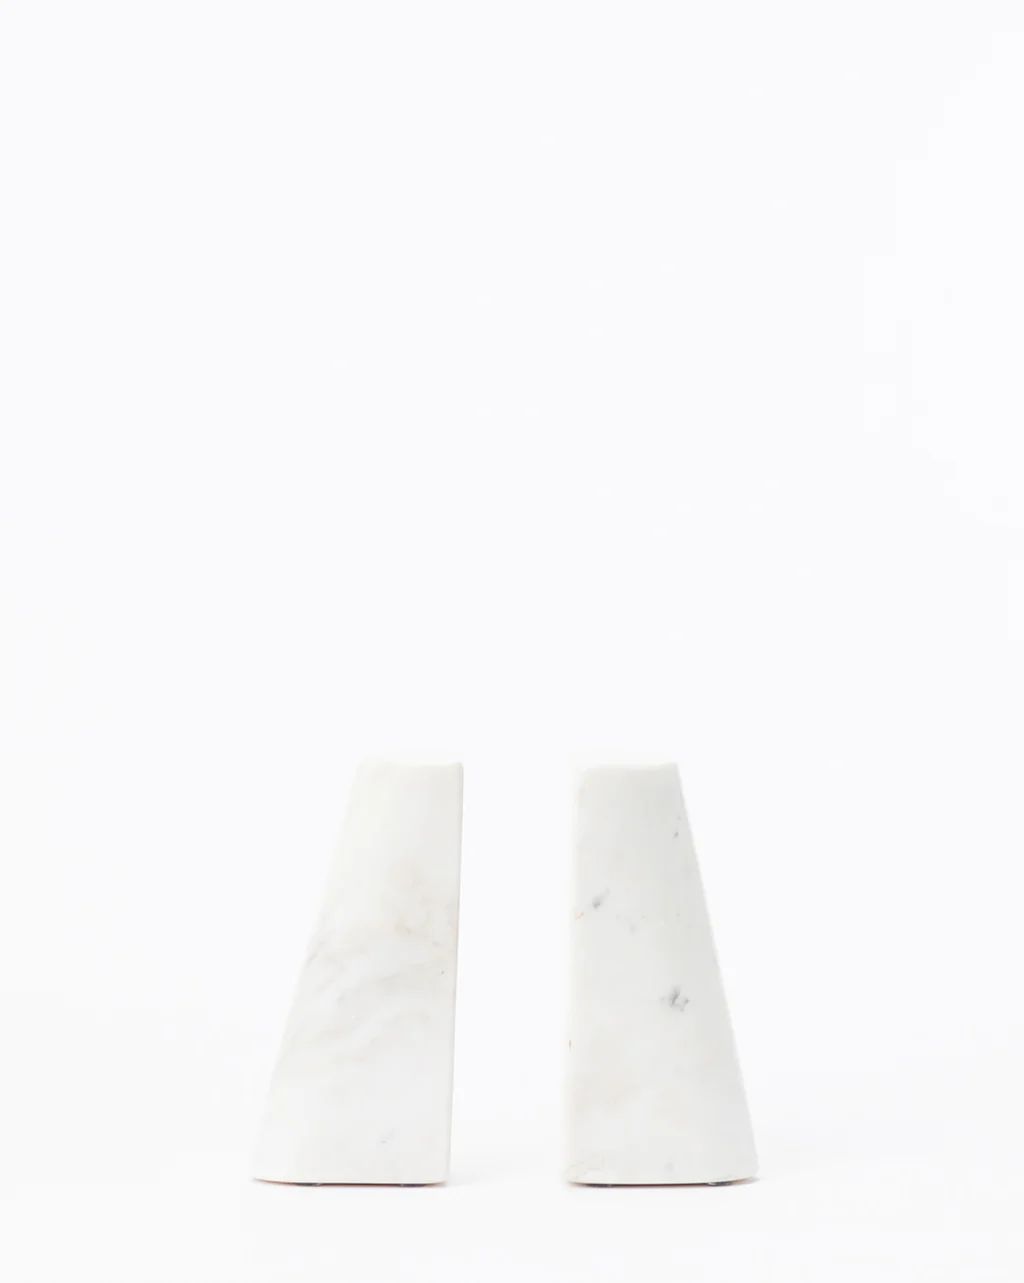 Tapered Marble Bookends (Set of 2) | McGee & Co.